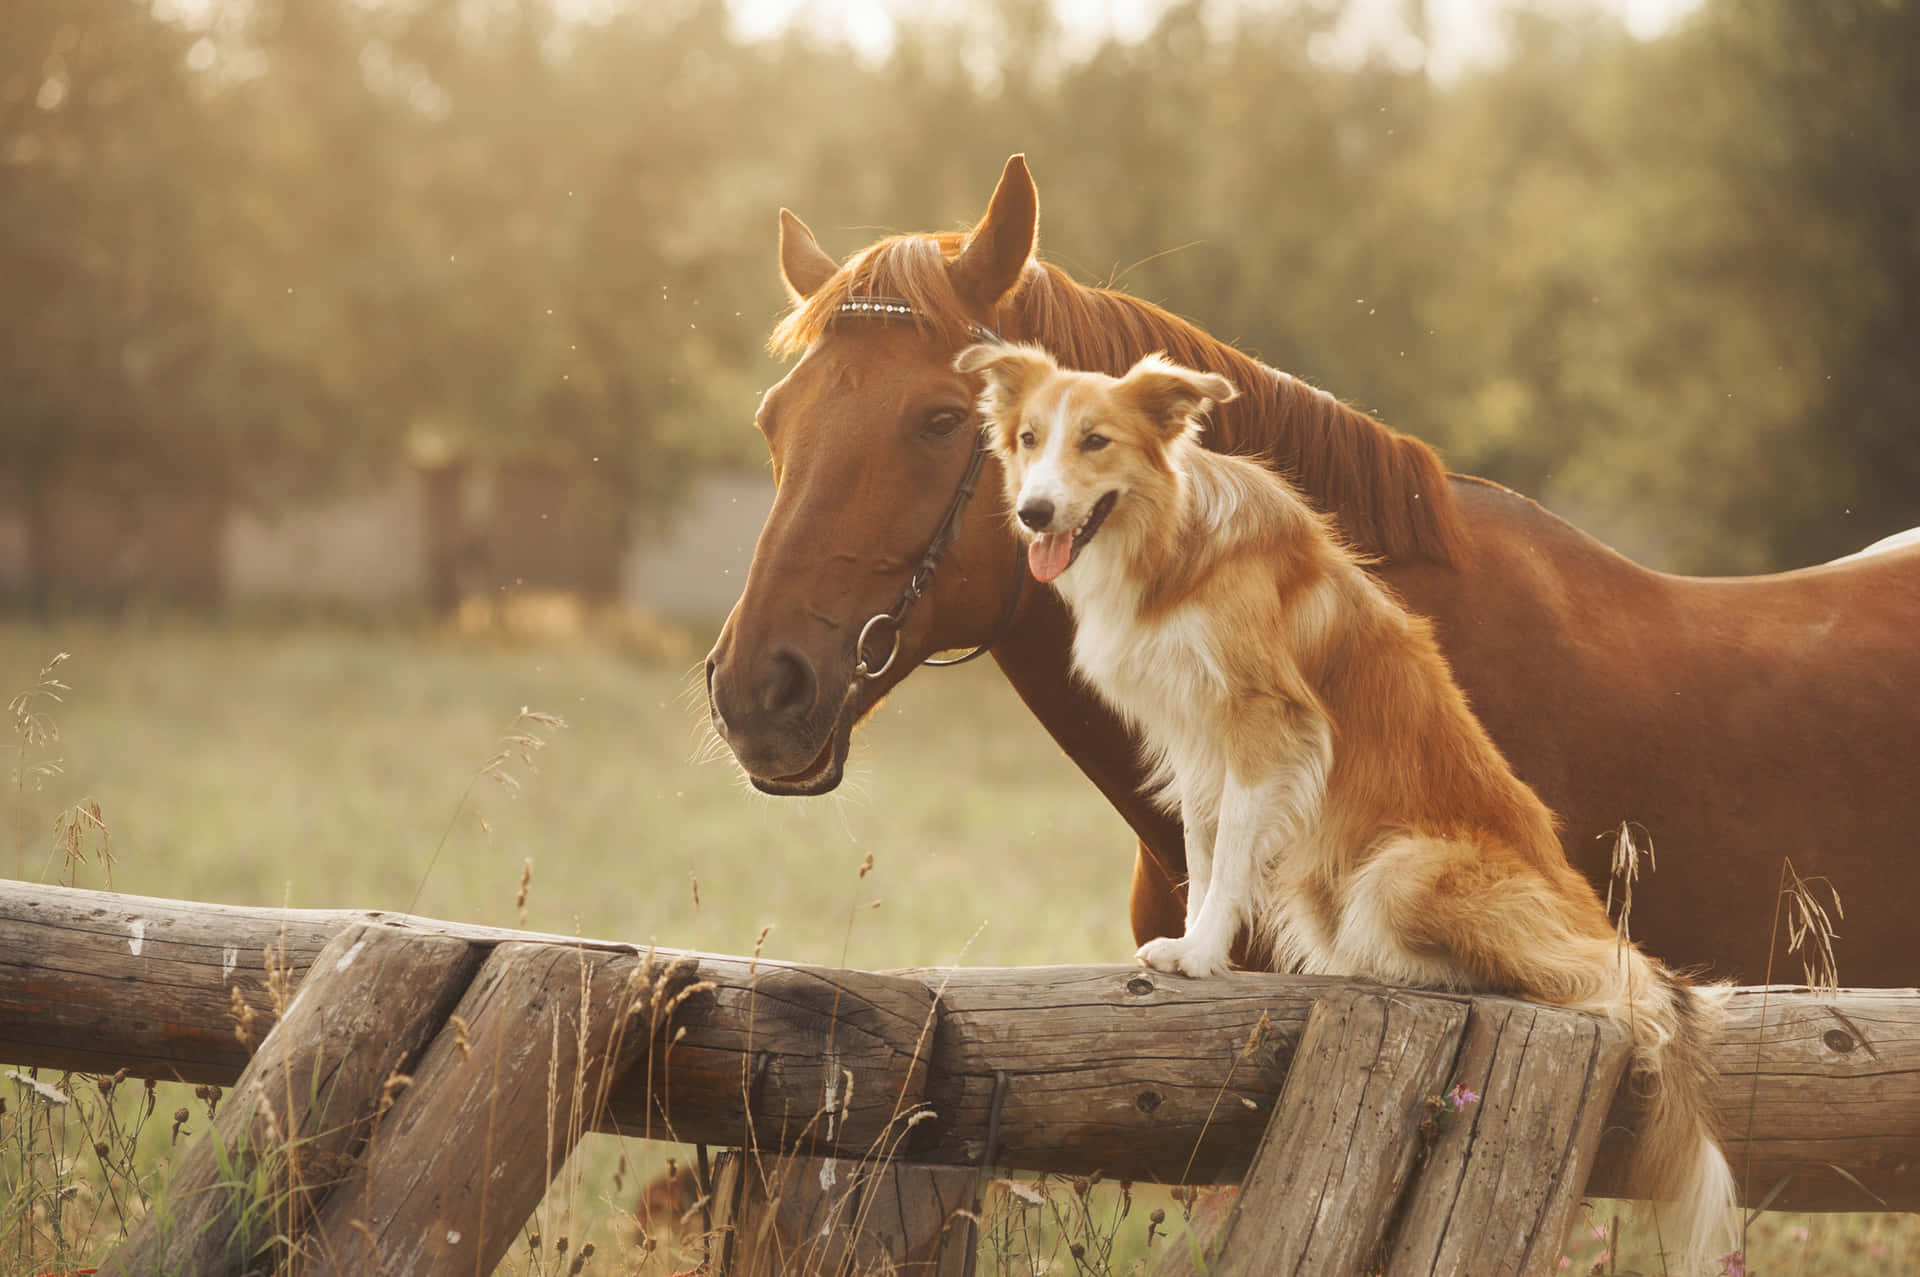 A Harmonious Moment Between Horse And Dog Wallpaper